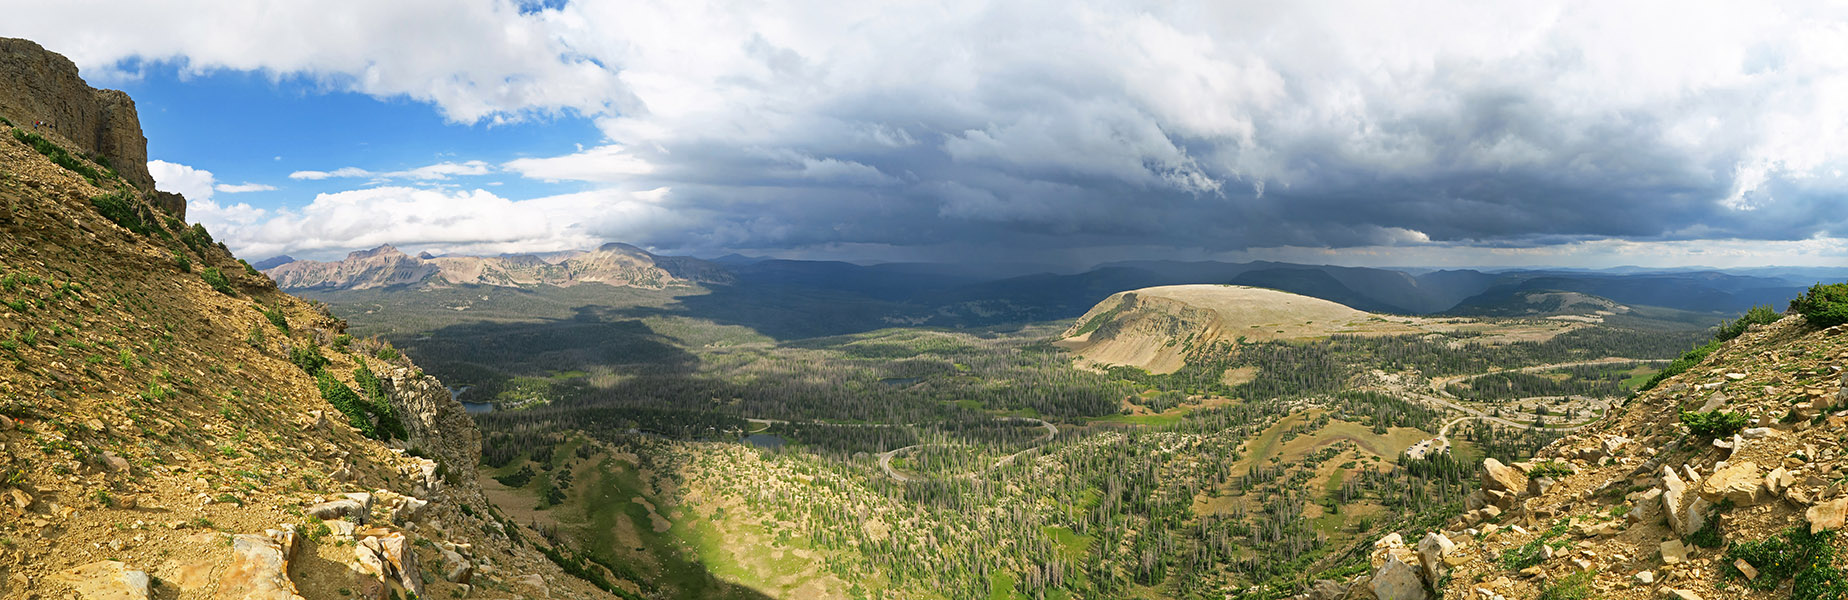 Uinta Mountains thunderstorm panorama [Bald Mountain Trail, Uinta-Wasatch-Cache National Forest, Summit County, Utah]